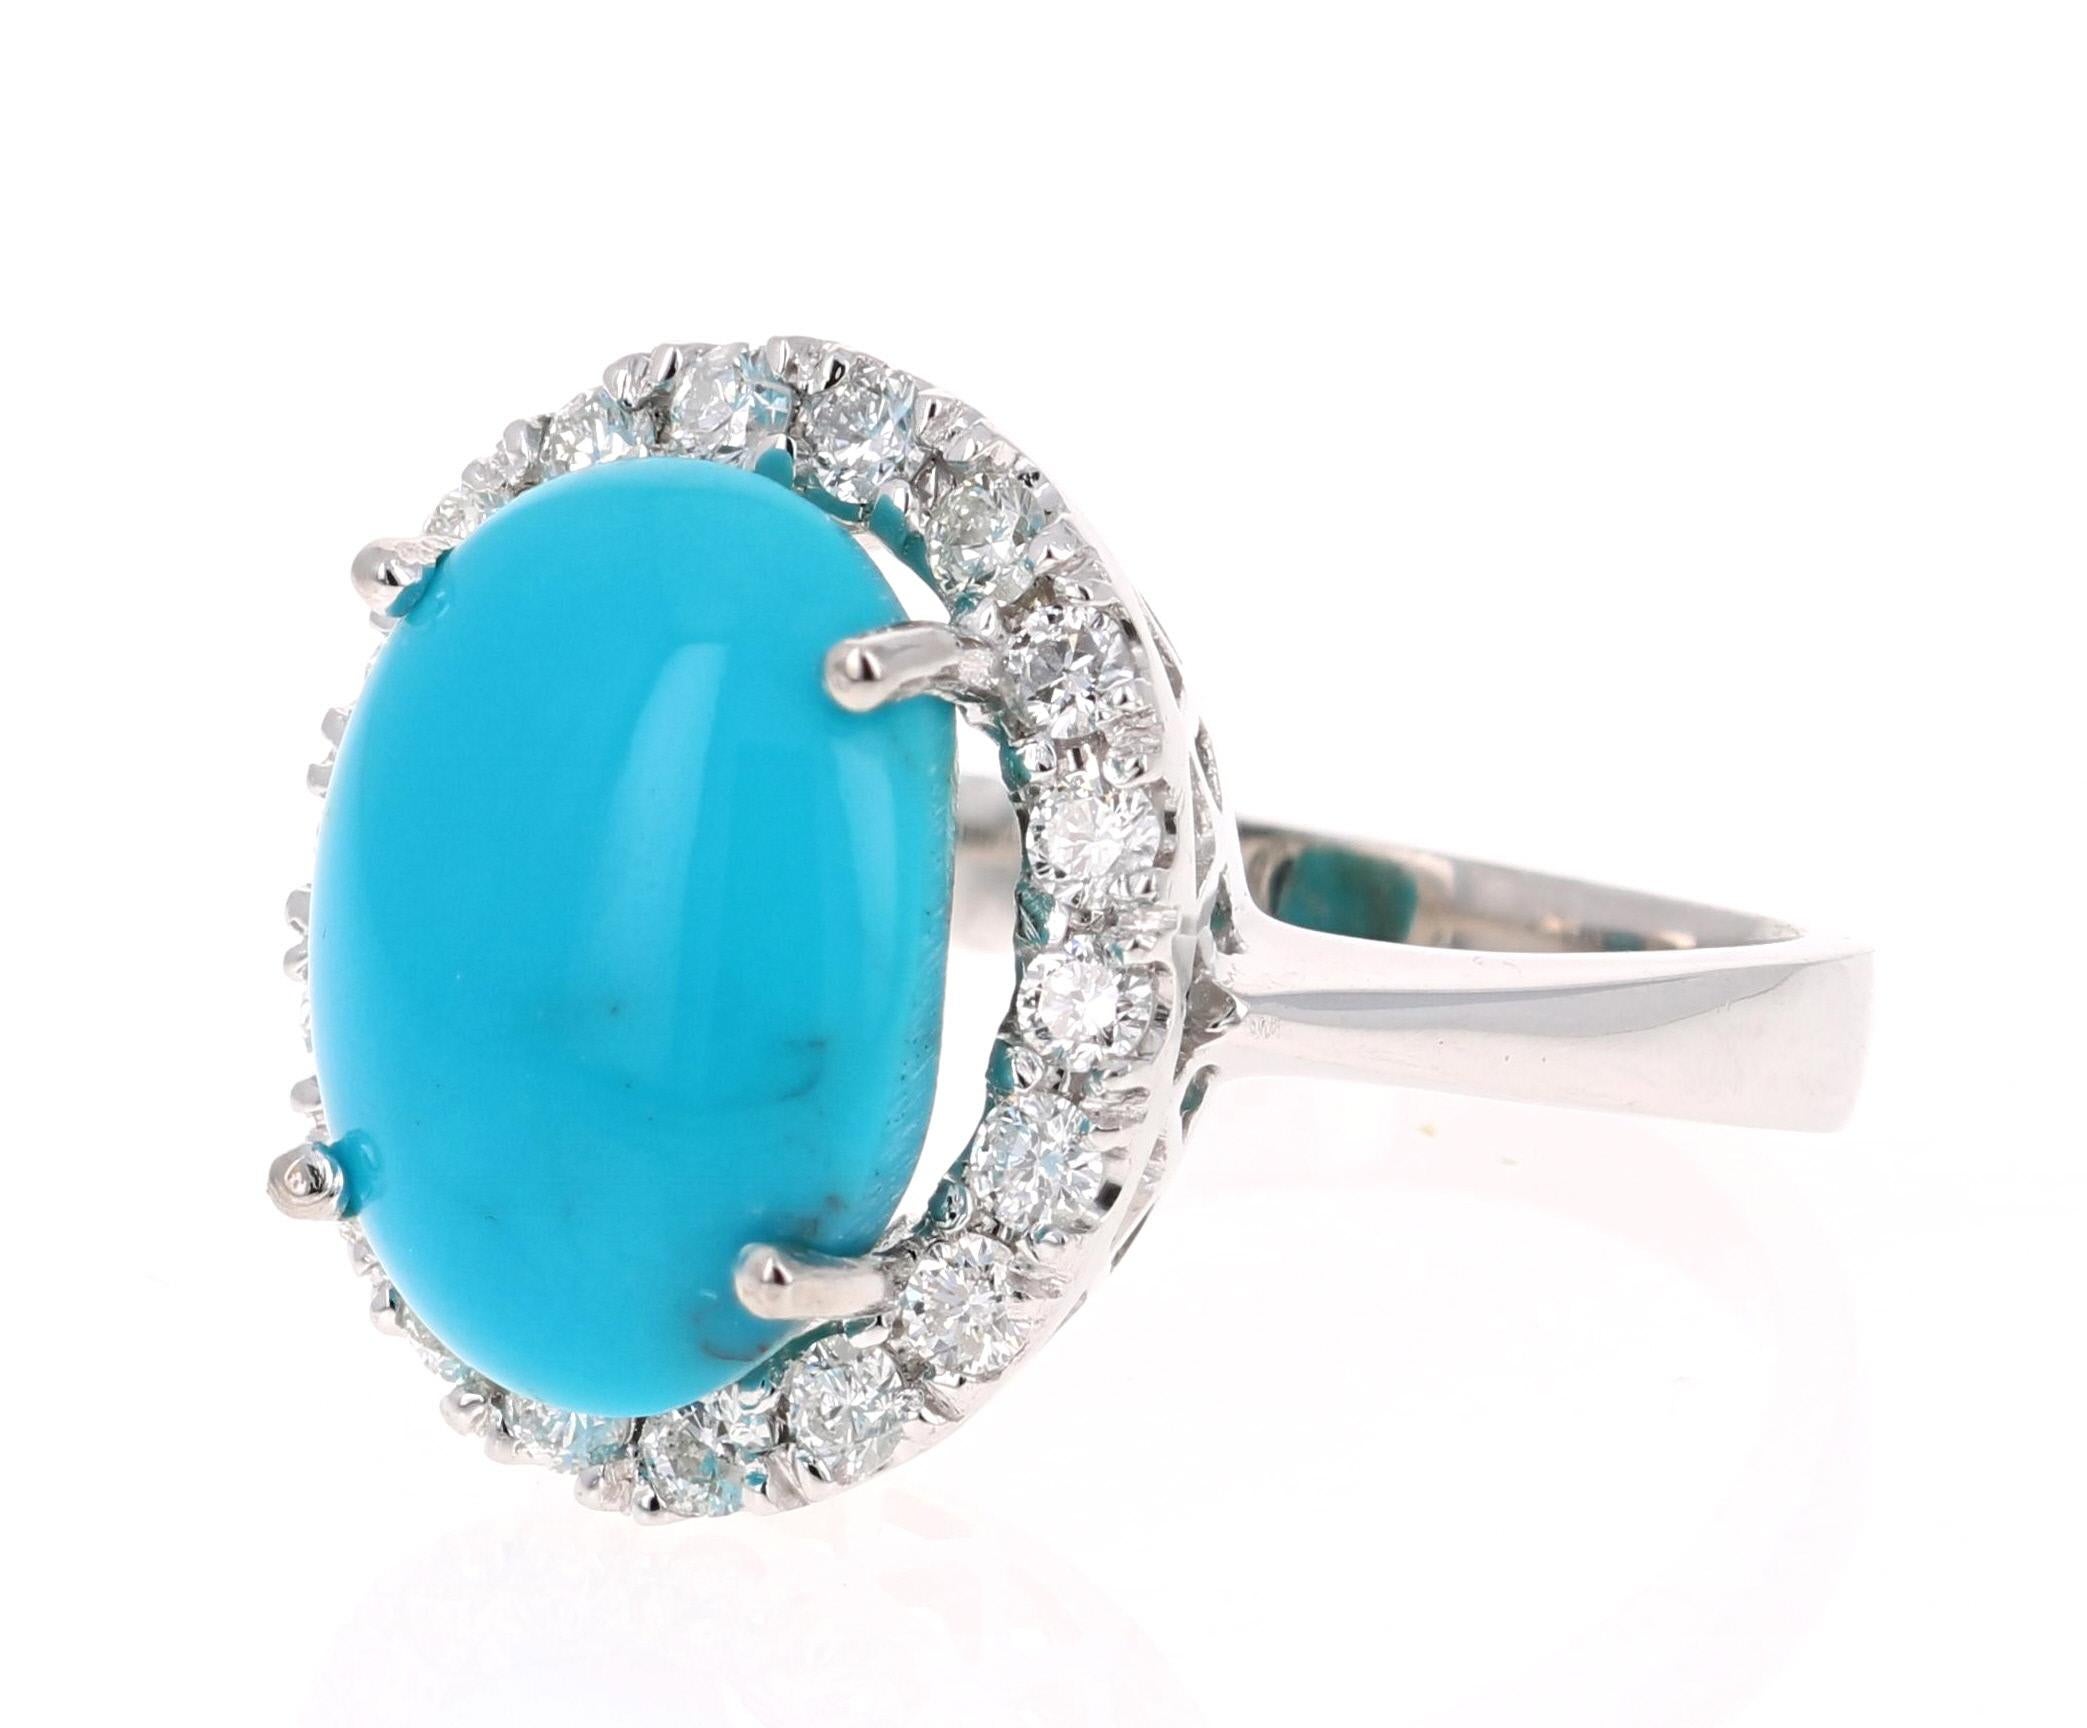 Modern 7.28 Carat Oval Cut Turquoise Diamond White Gold Cocktail Ring